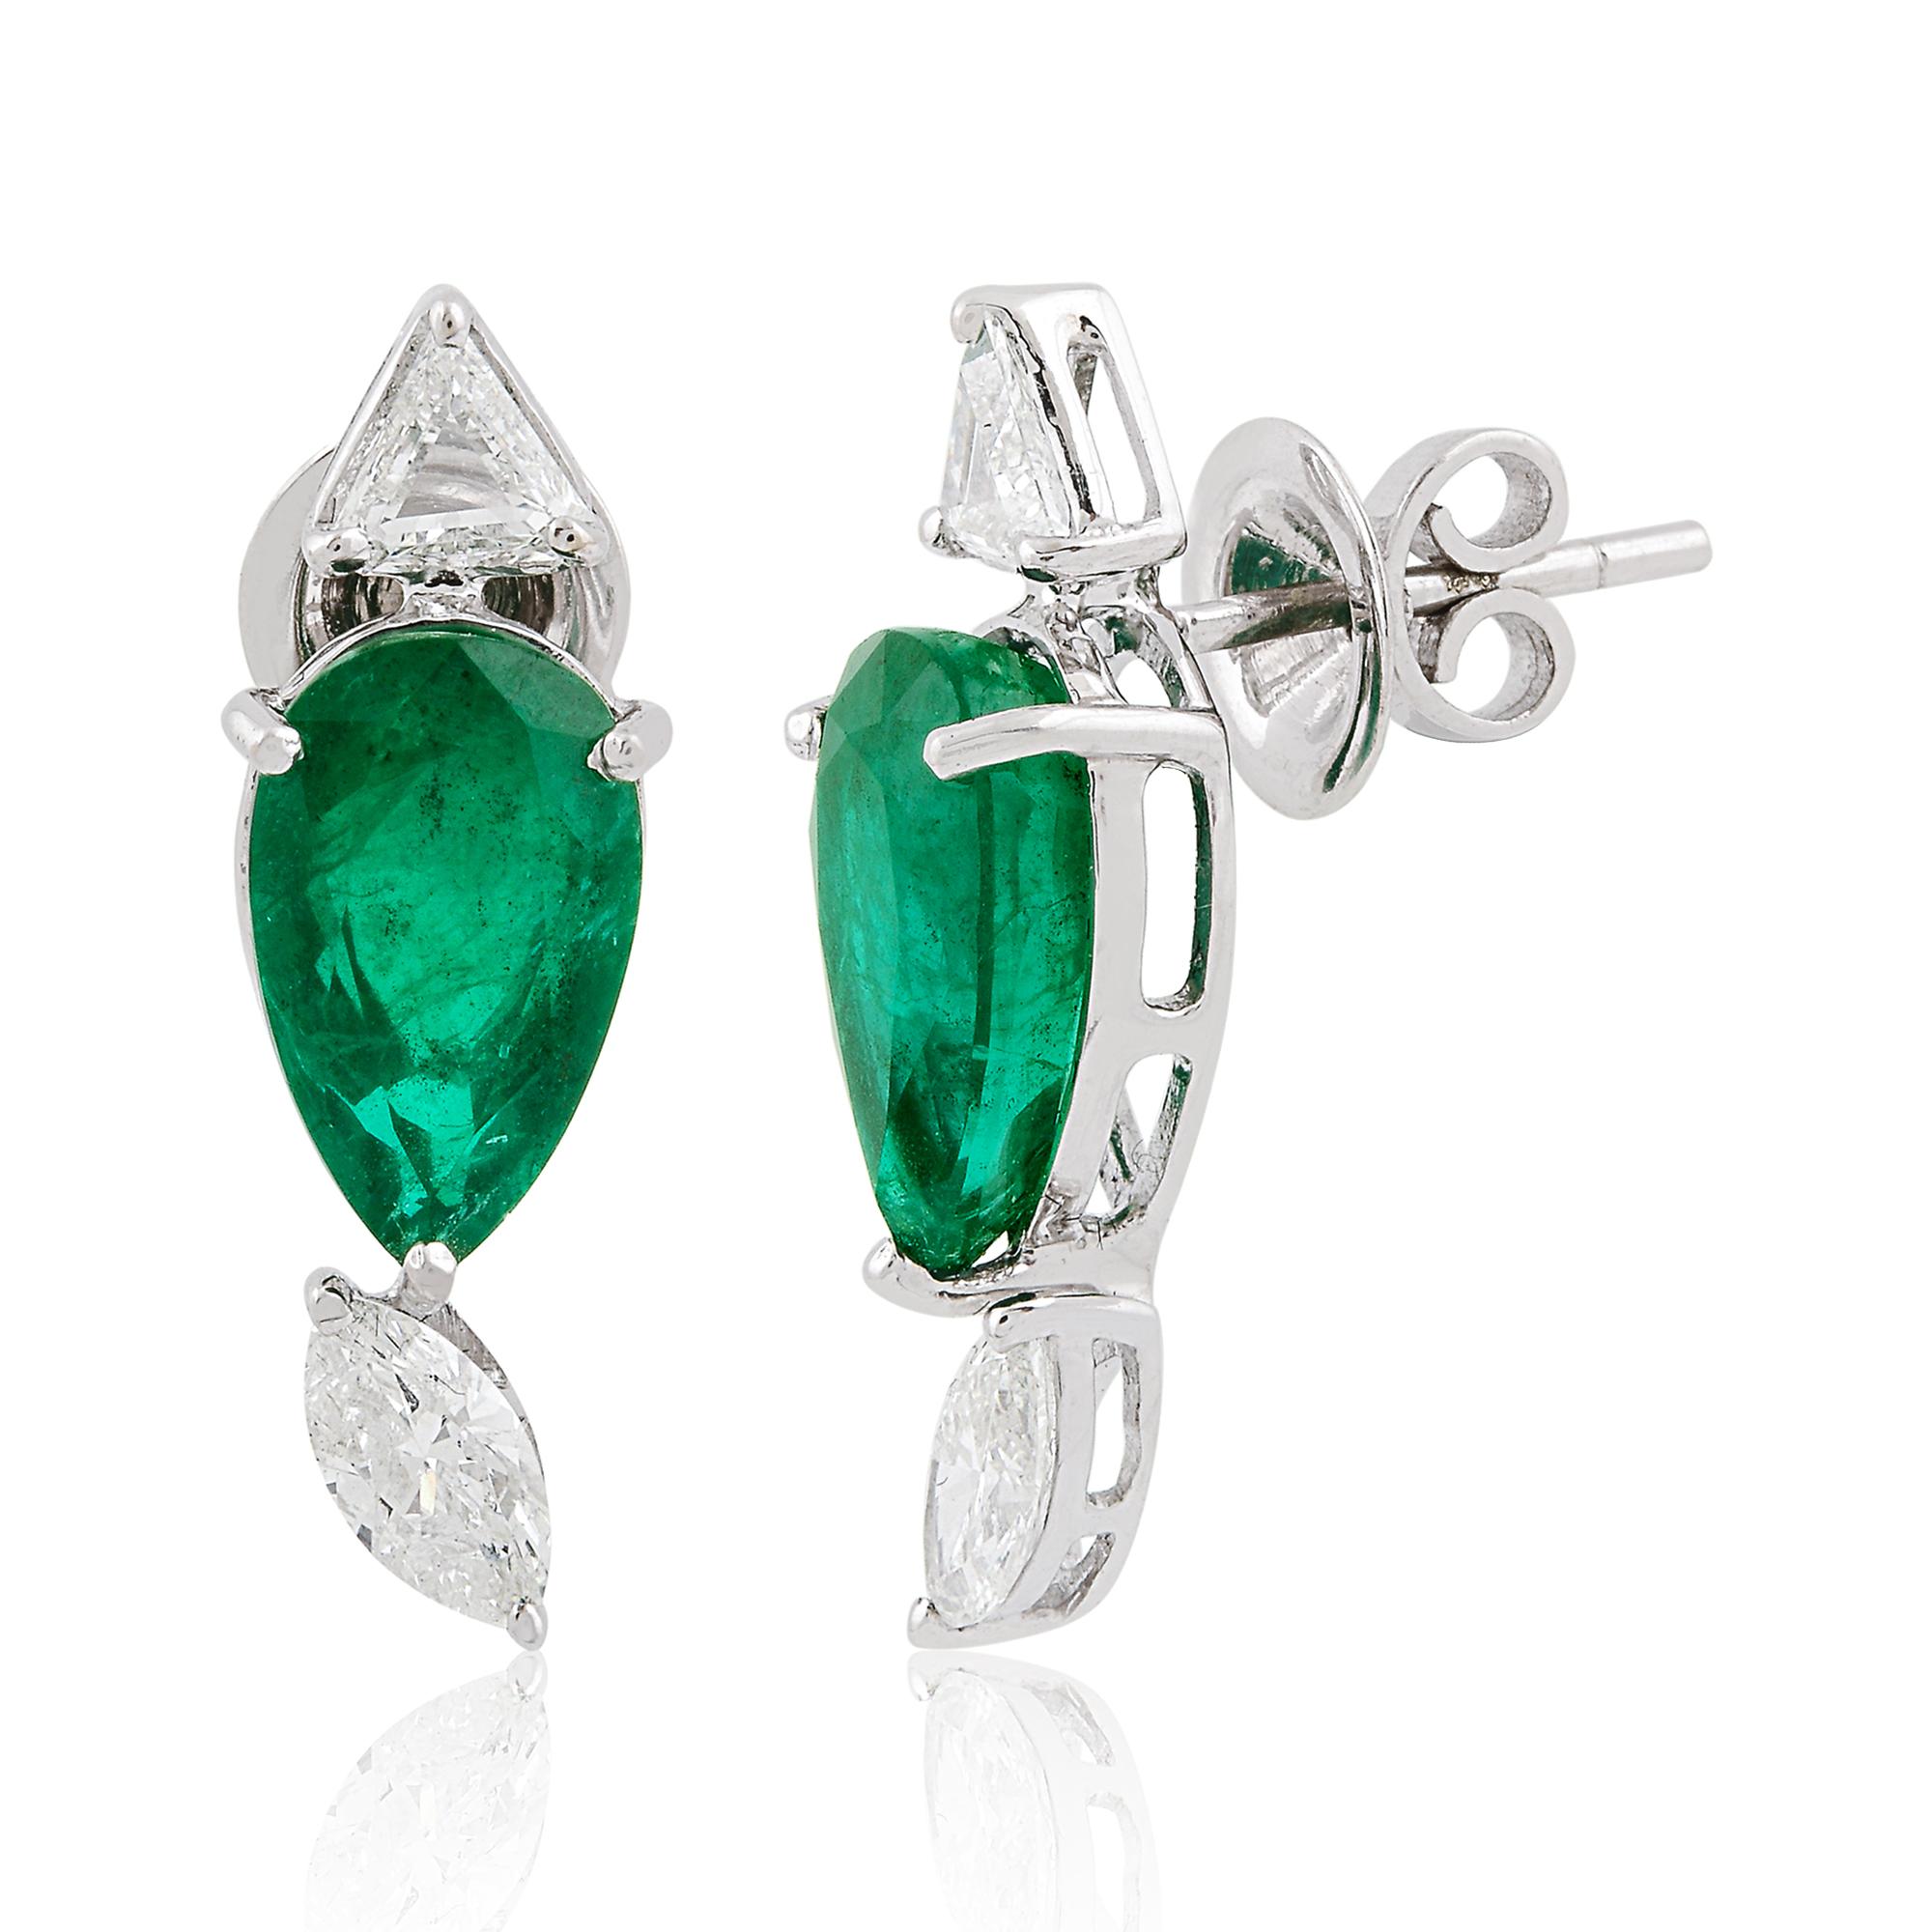 Item Code :- SEE-1560
Gross Wt. :- 4.63 gm
18k White Gold Wt. :- 3.48 gm
Diamond Wt. :- 1.50 Ct. ( AVERAGE DIAMOND CLARITY SI1-SI2 & COLOR H-I )
Emerald Wt. :- 4.27 Ct.
Earrings Size :- 23 mm approx.
✦ Sizing
.....................
We can adjust most